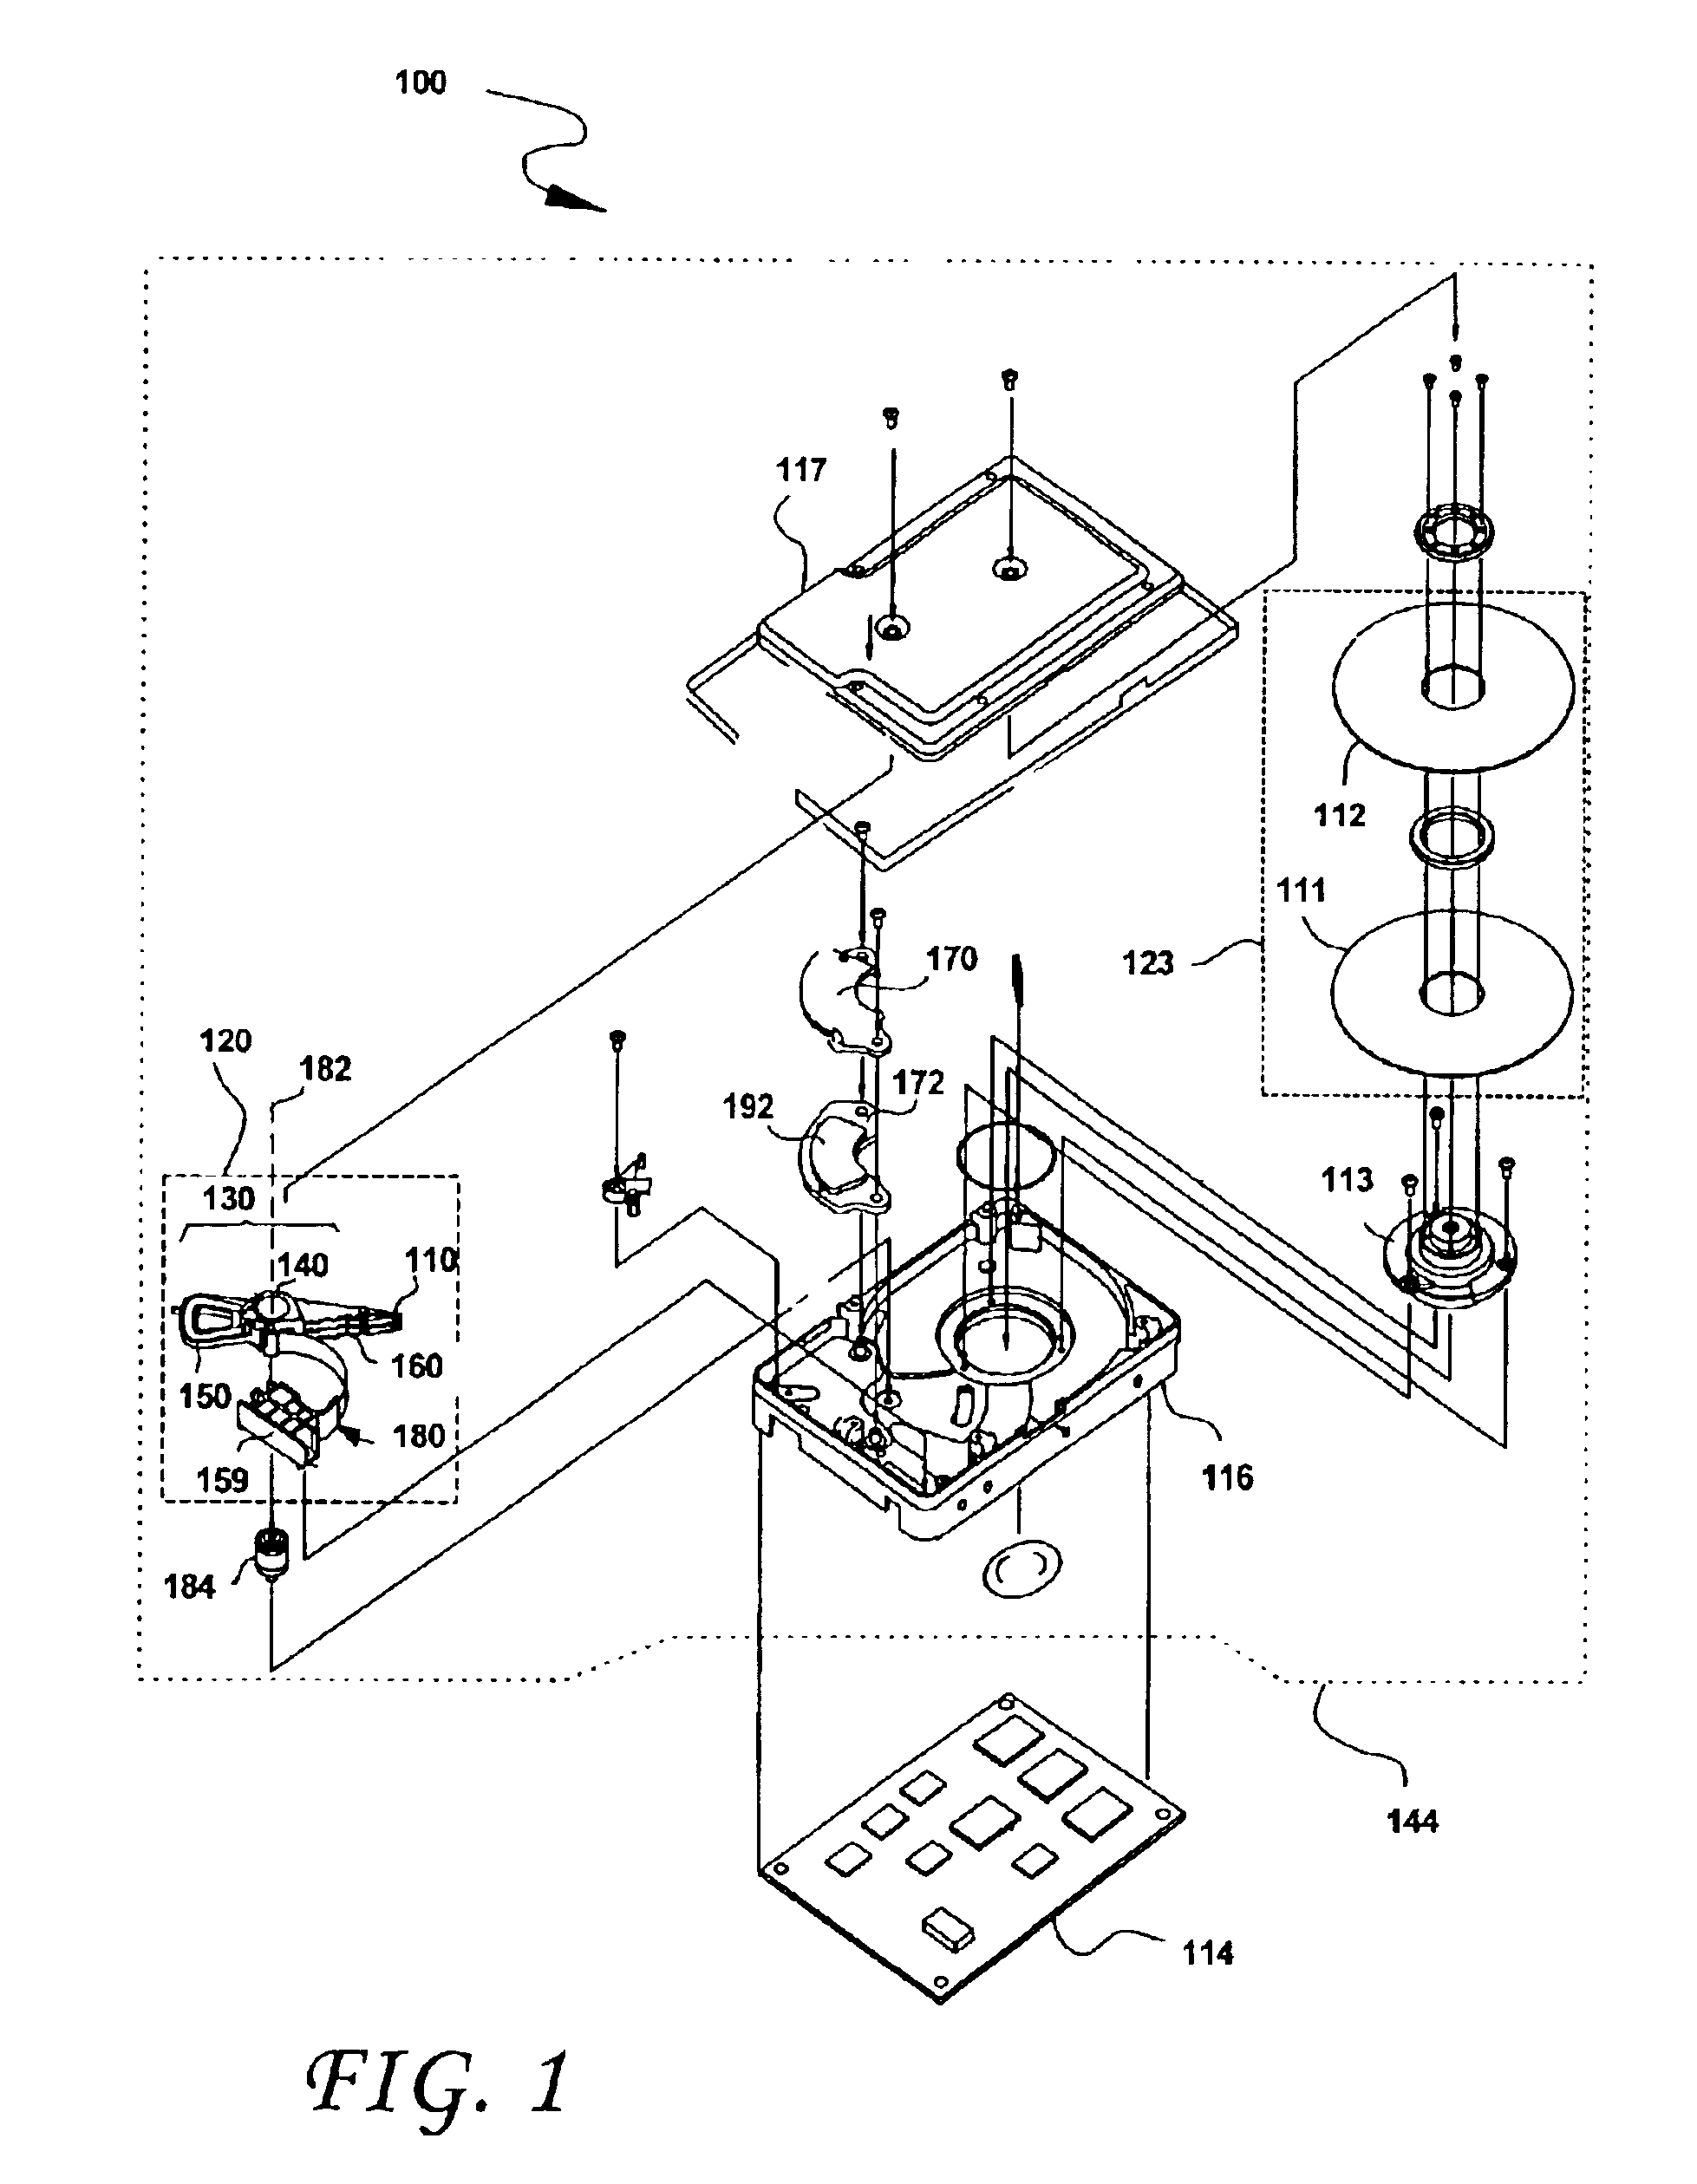 Methods, systems and devices for converting the kinetic energy of a rotating disk drive spindle motor into electrical energy to charge a rechargeable battery